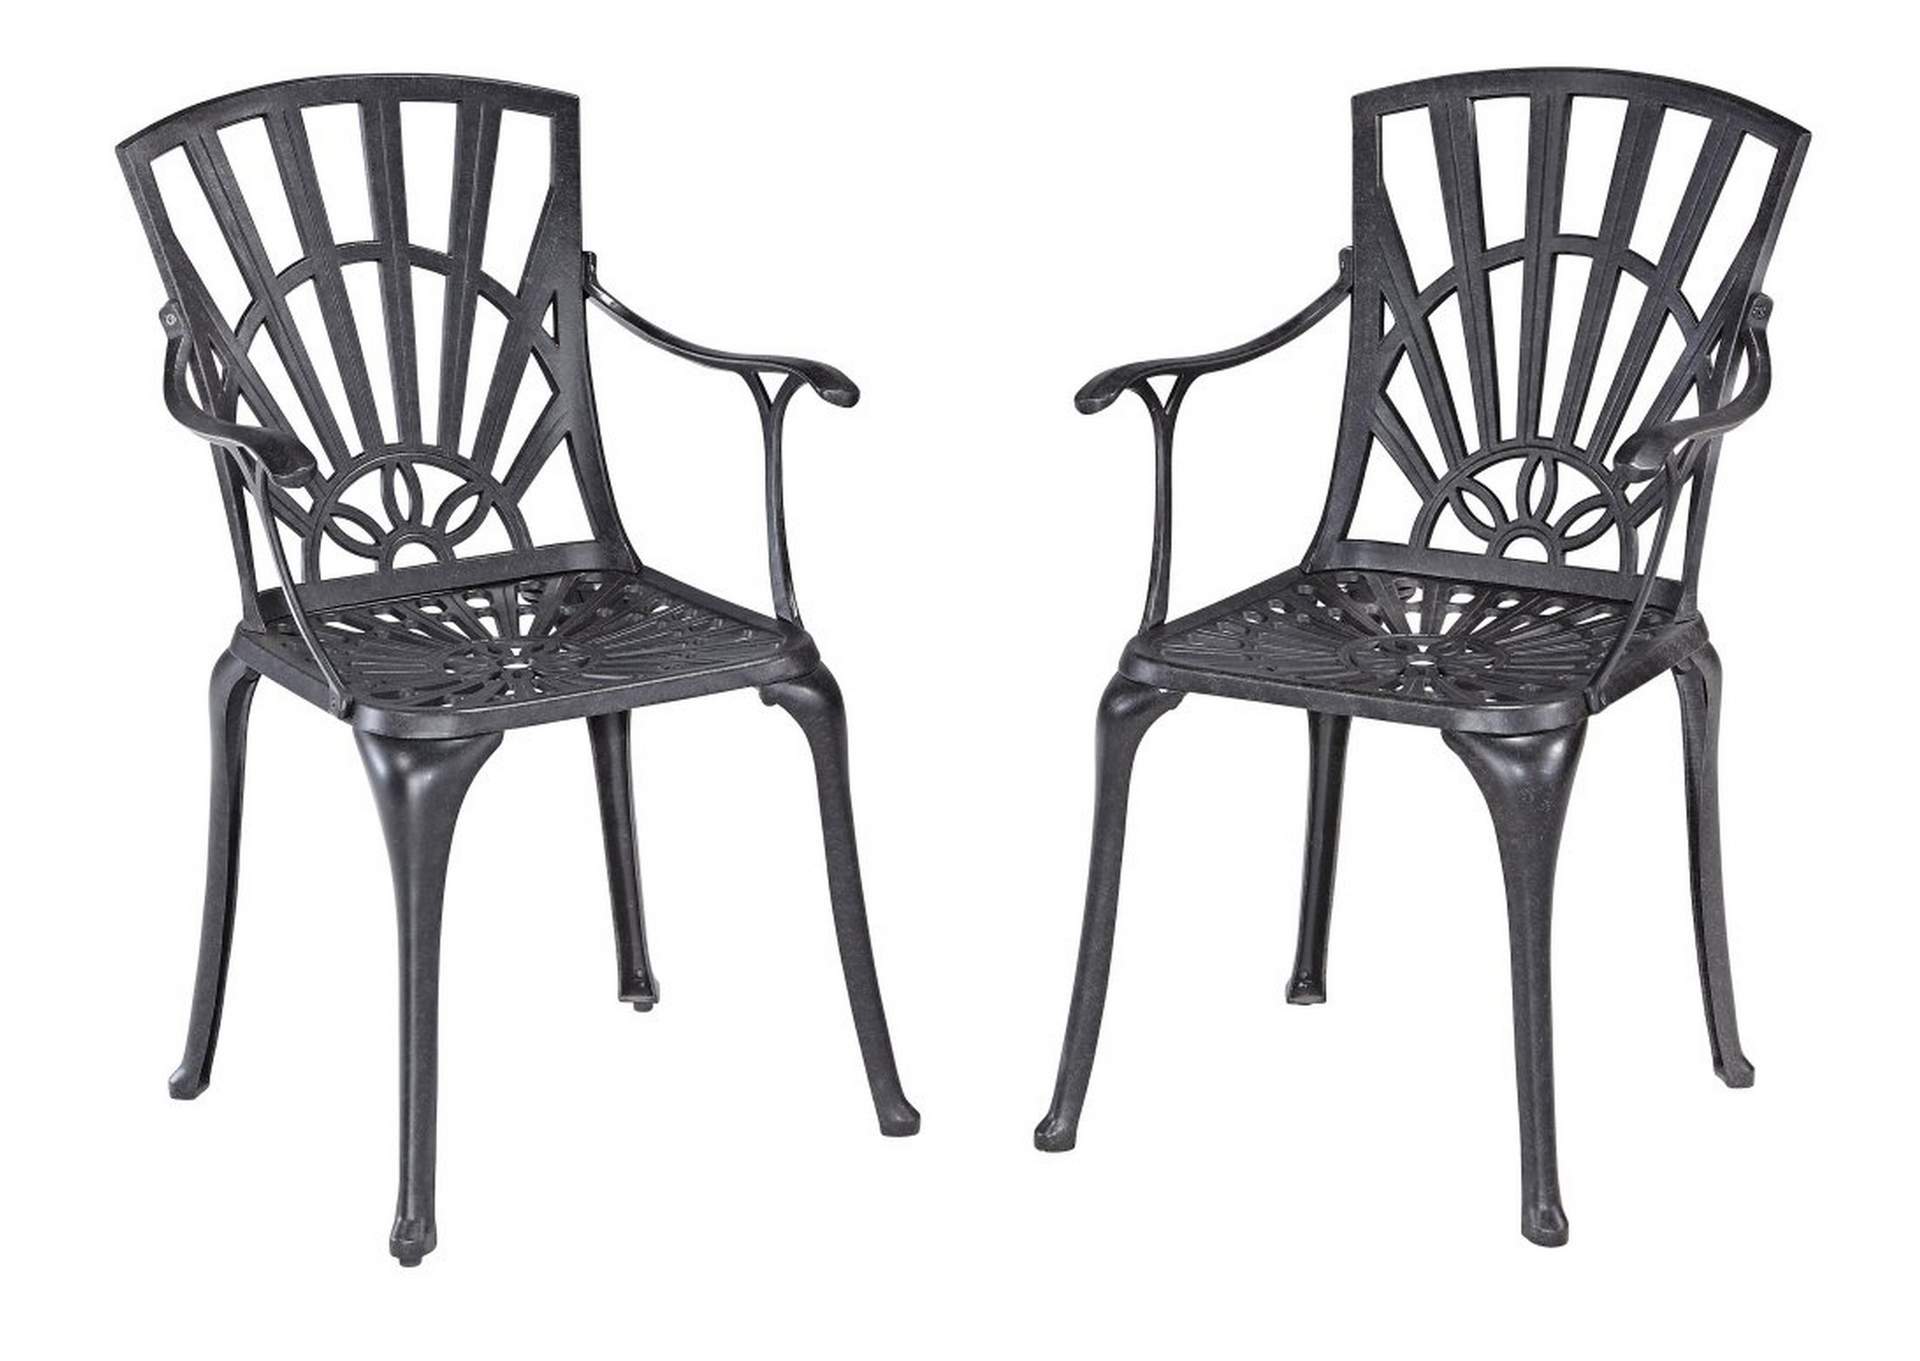 Grenada Outdoor Chair Pair By Homestyles,Homestyles